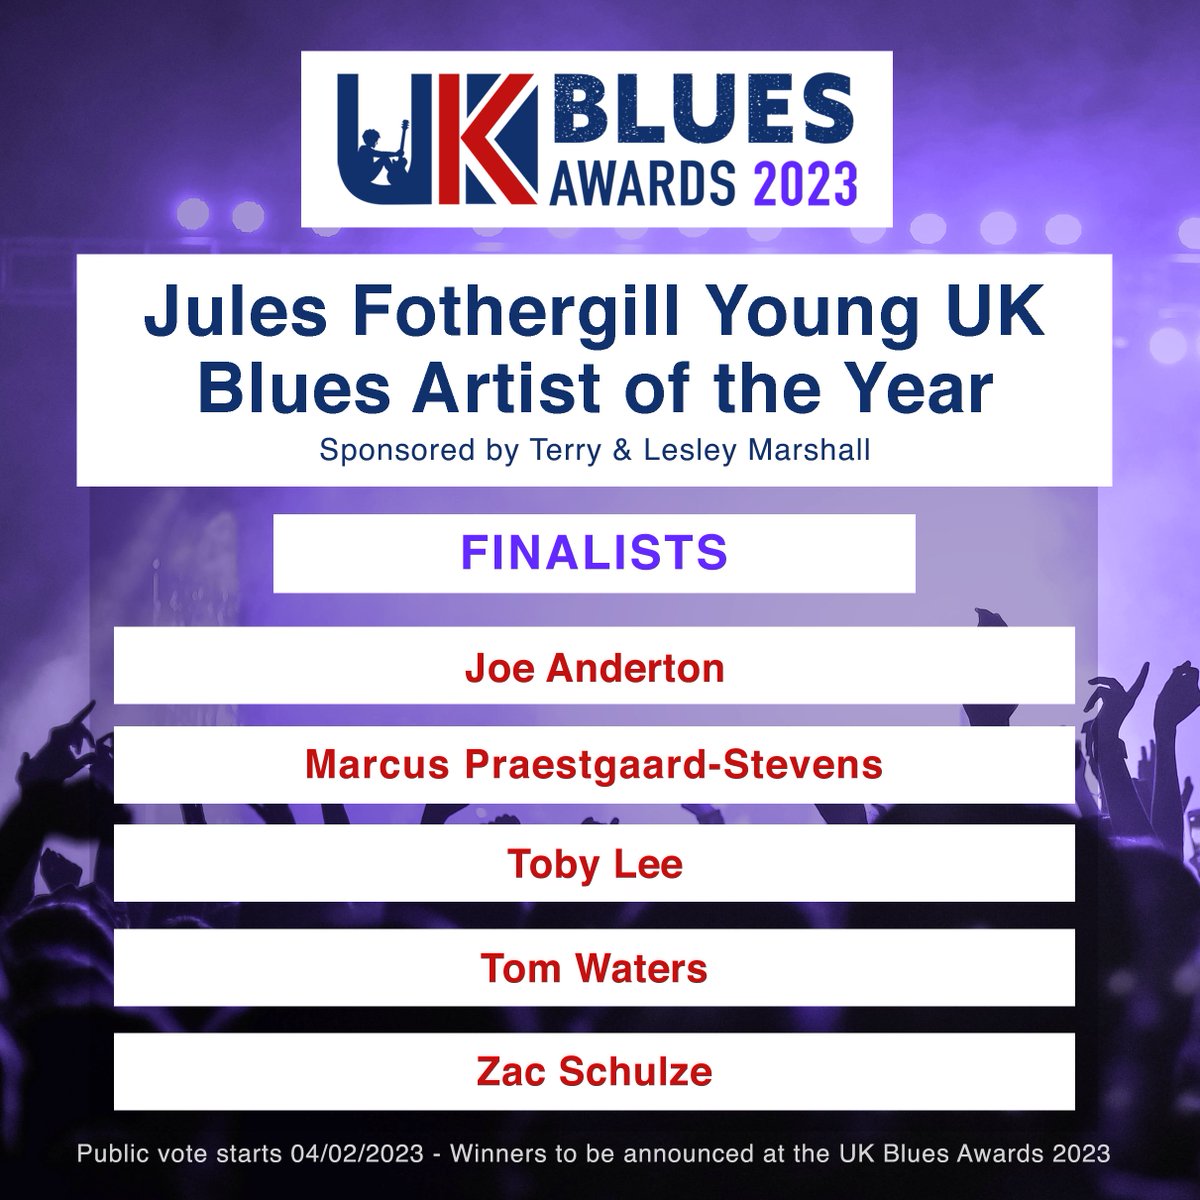 Today's the day we reveal the top 5 nominees who are the Finalists in each category in The UK Blues Awards. Congratulations to all involved! Public voting starts on 4th February so watch out for the link then. Here's the Young Artist of The Year category Finalists